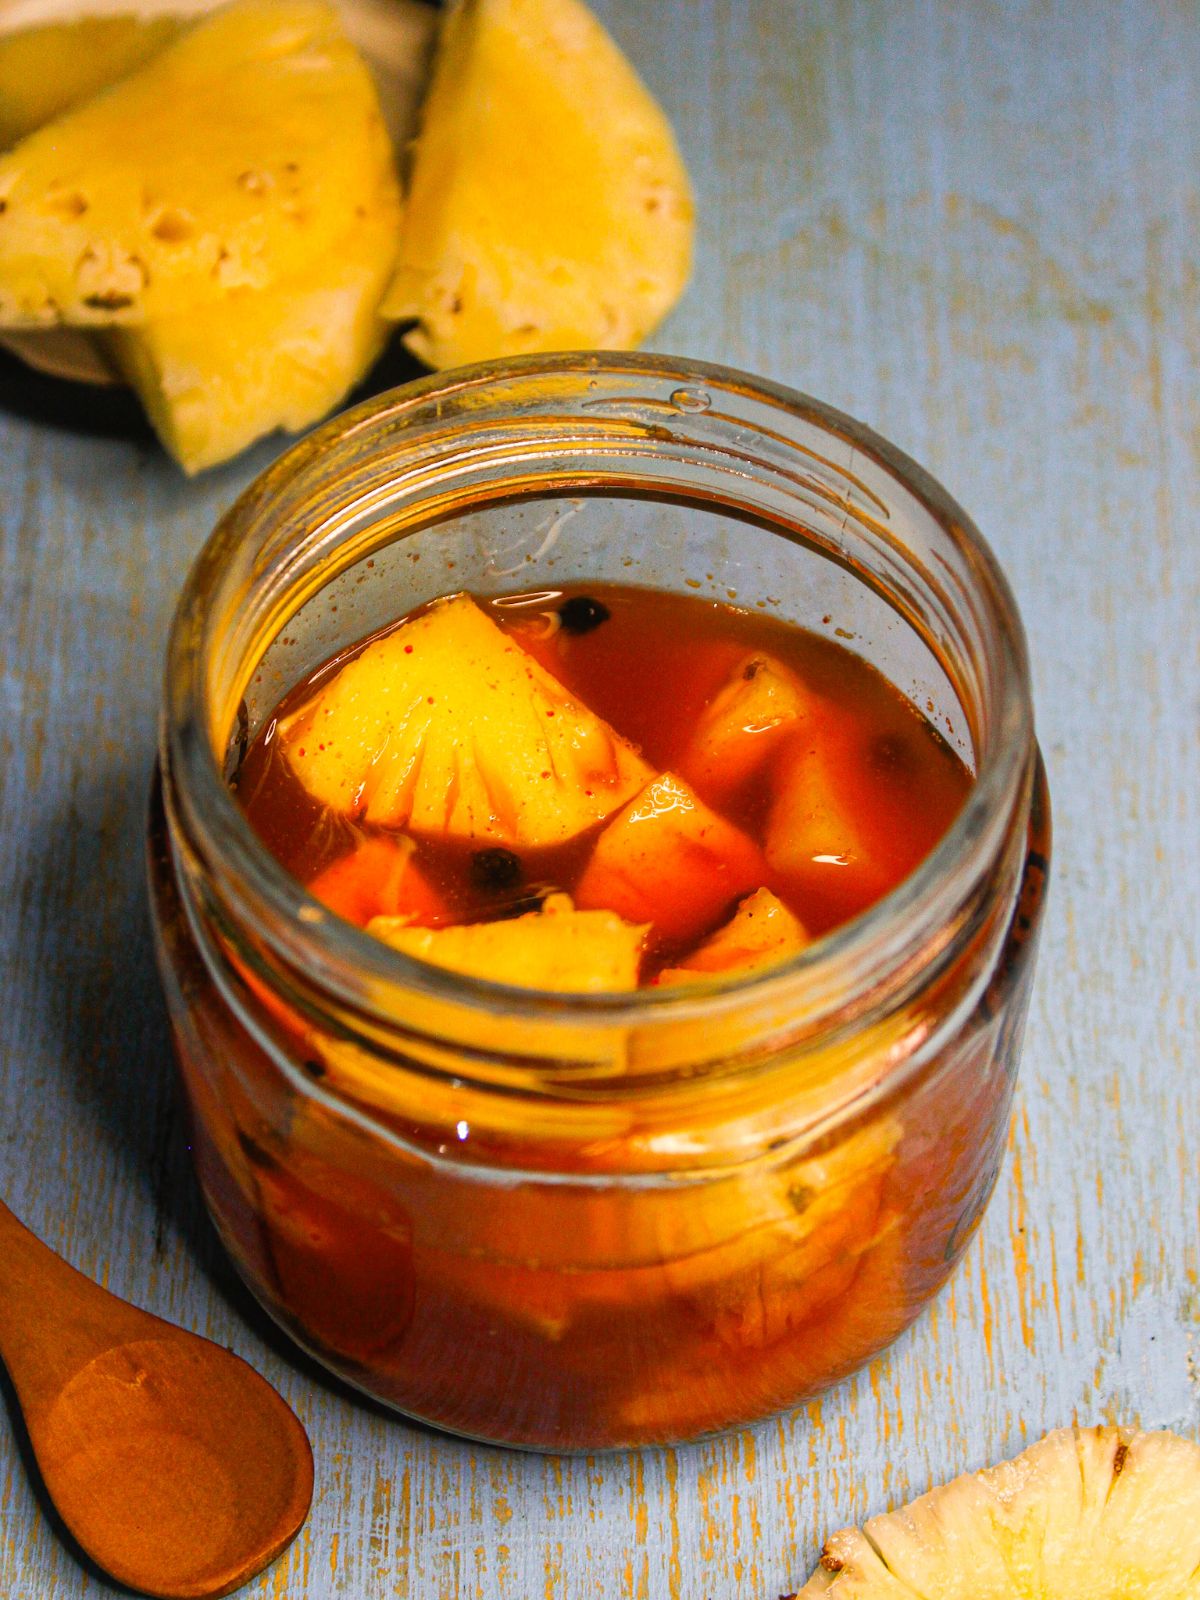 Pineapple Acharu: Sri Lankan Pineapple Pickle served in a jar with raw pineapple pieces in the background